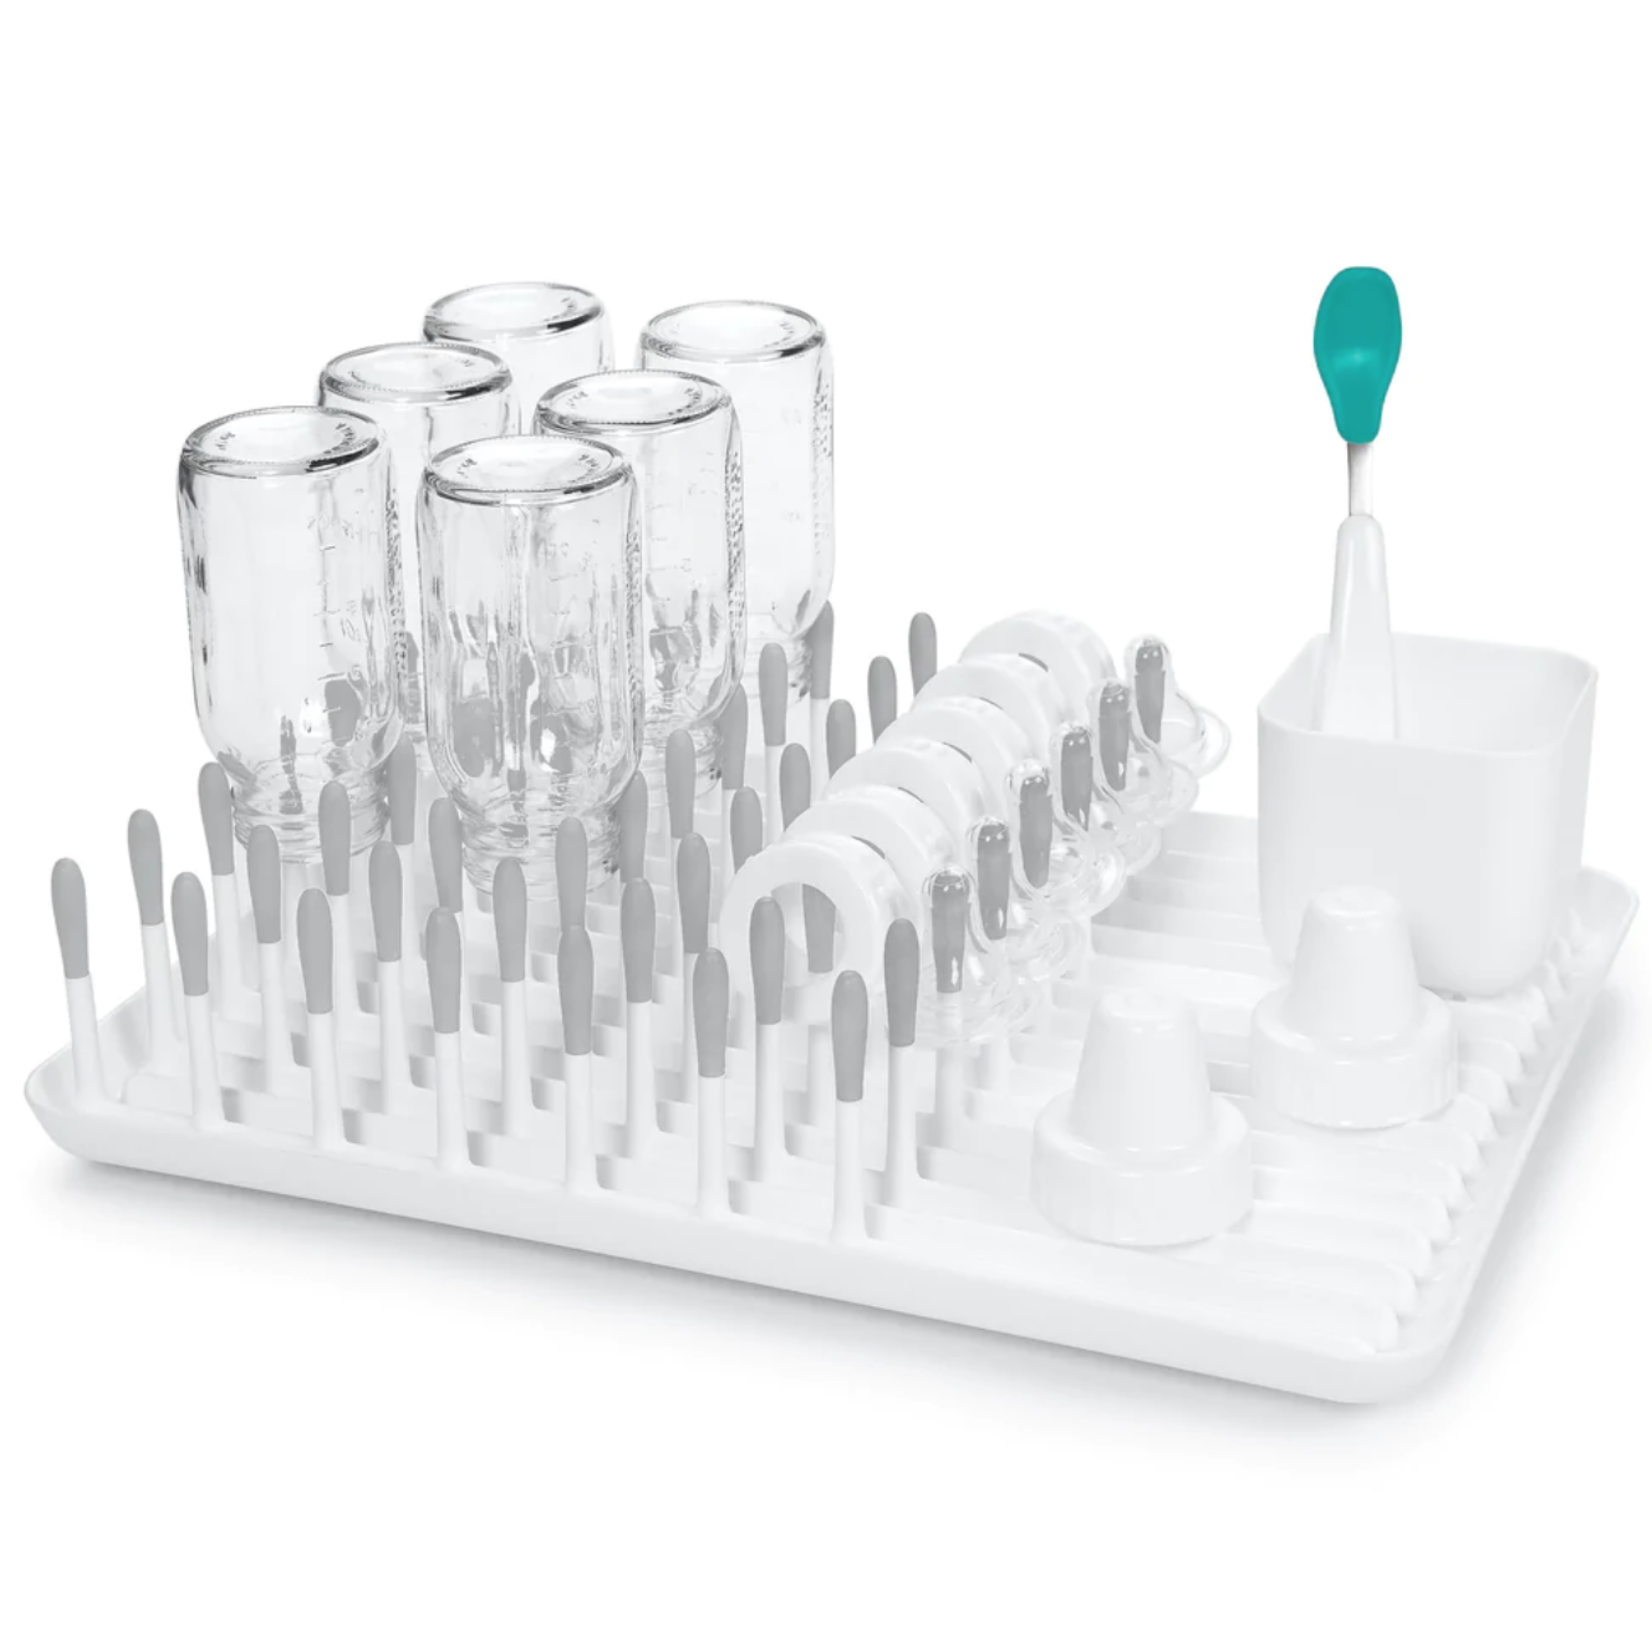 OXO Tot Bottle & Cup Cleaning Set - Grey